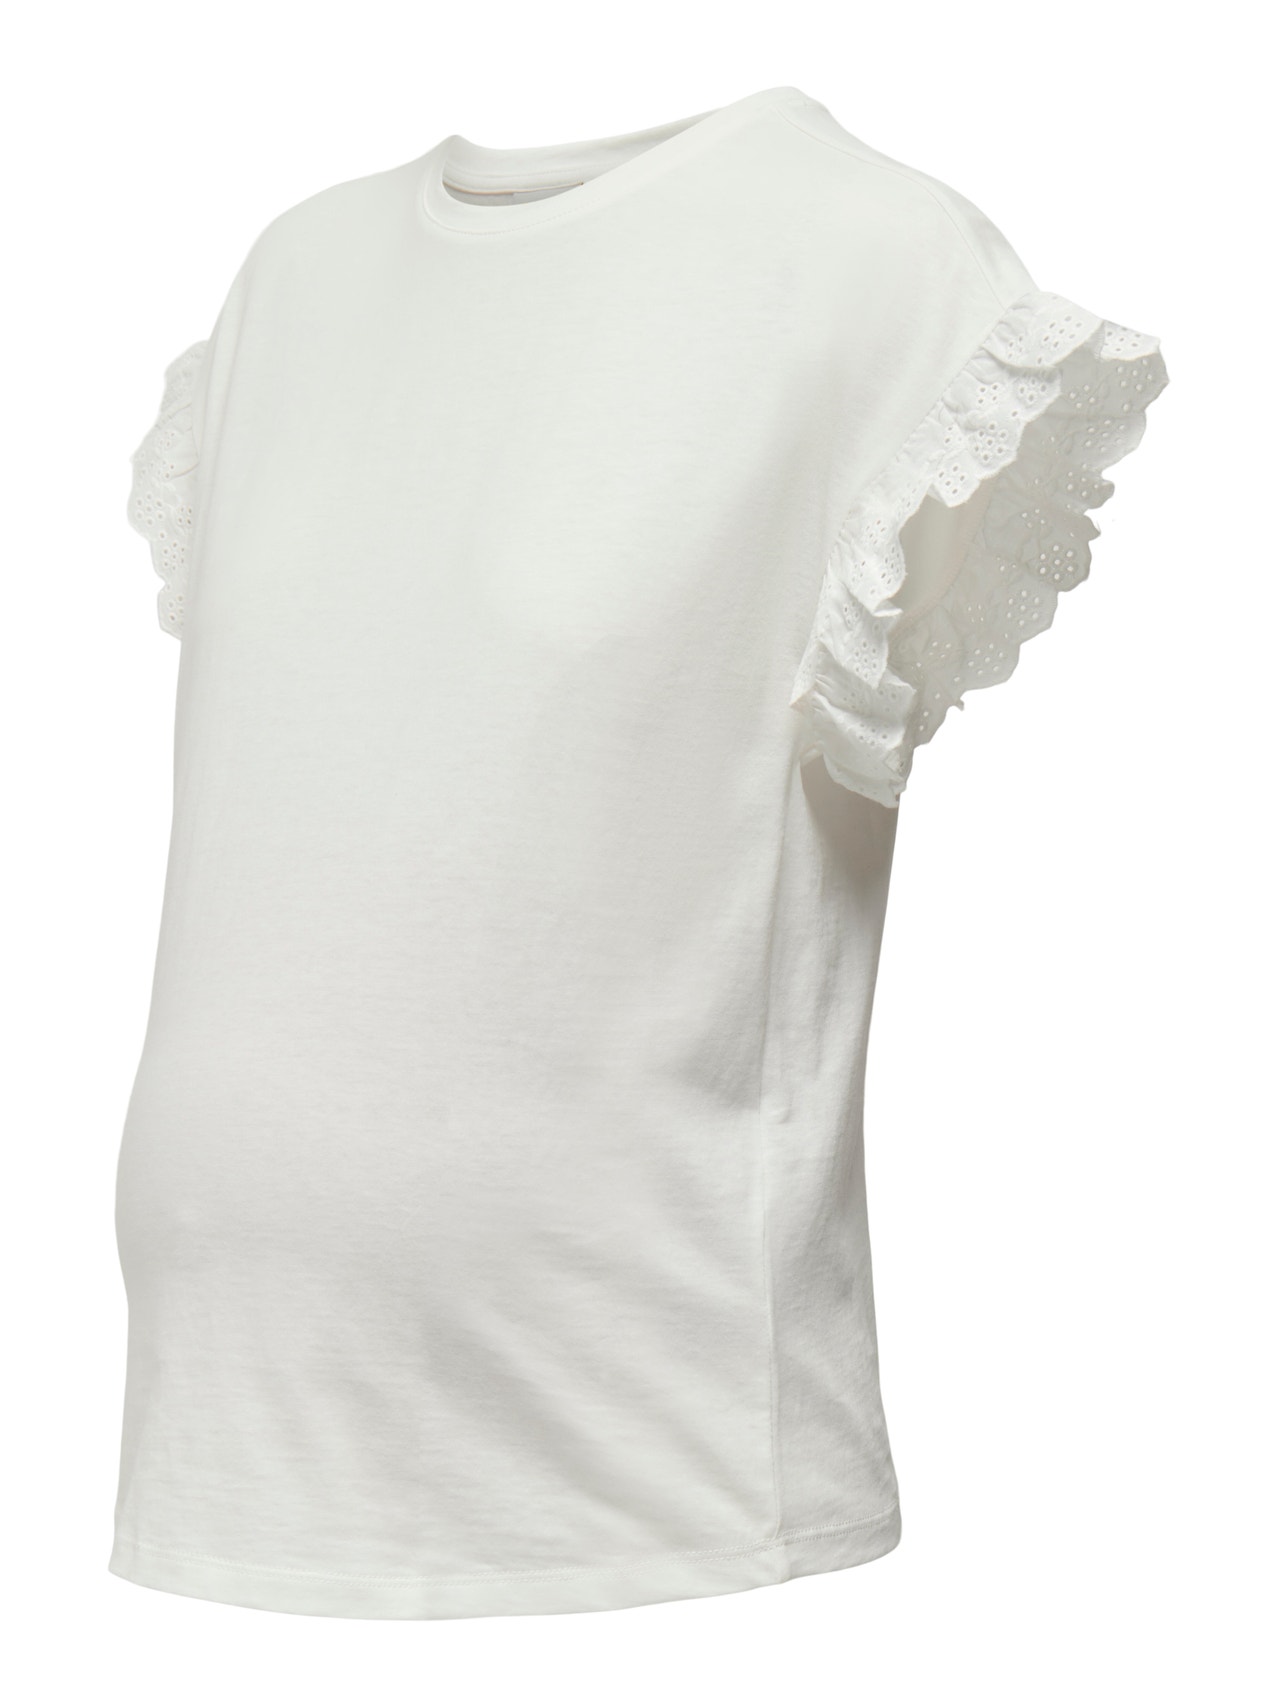 ONLY Mama frill detail top -Cloud Dancer - 15298820